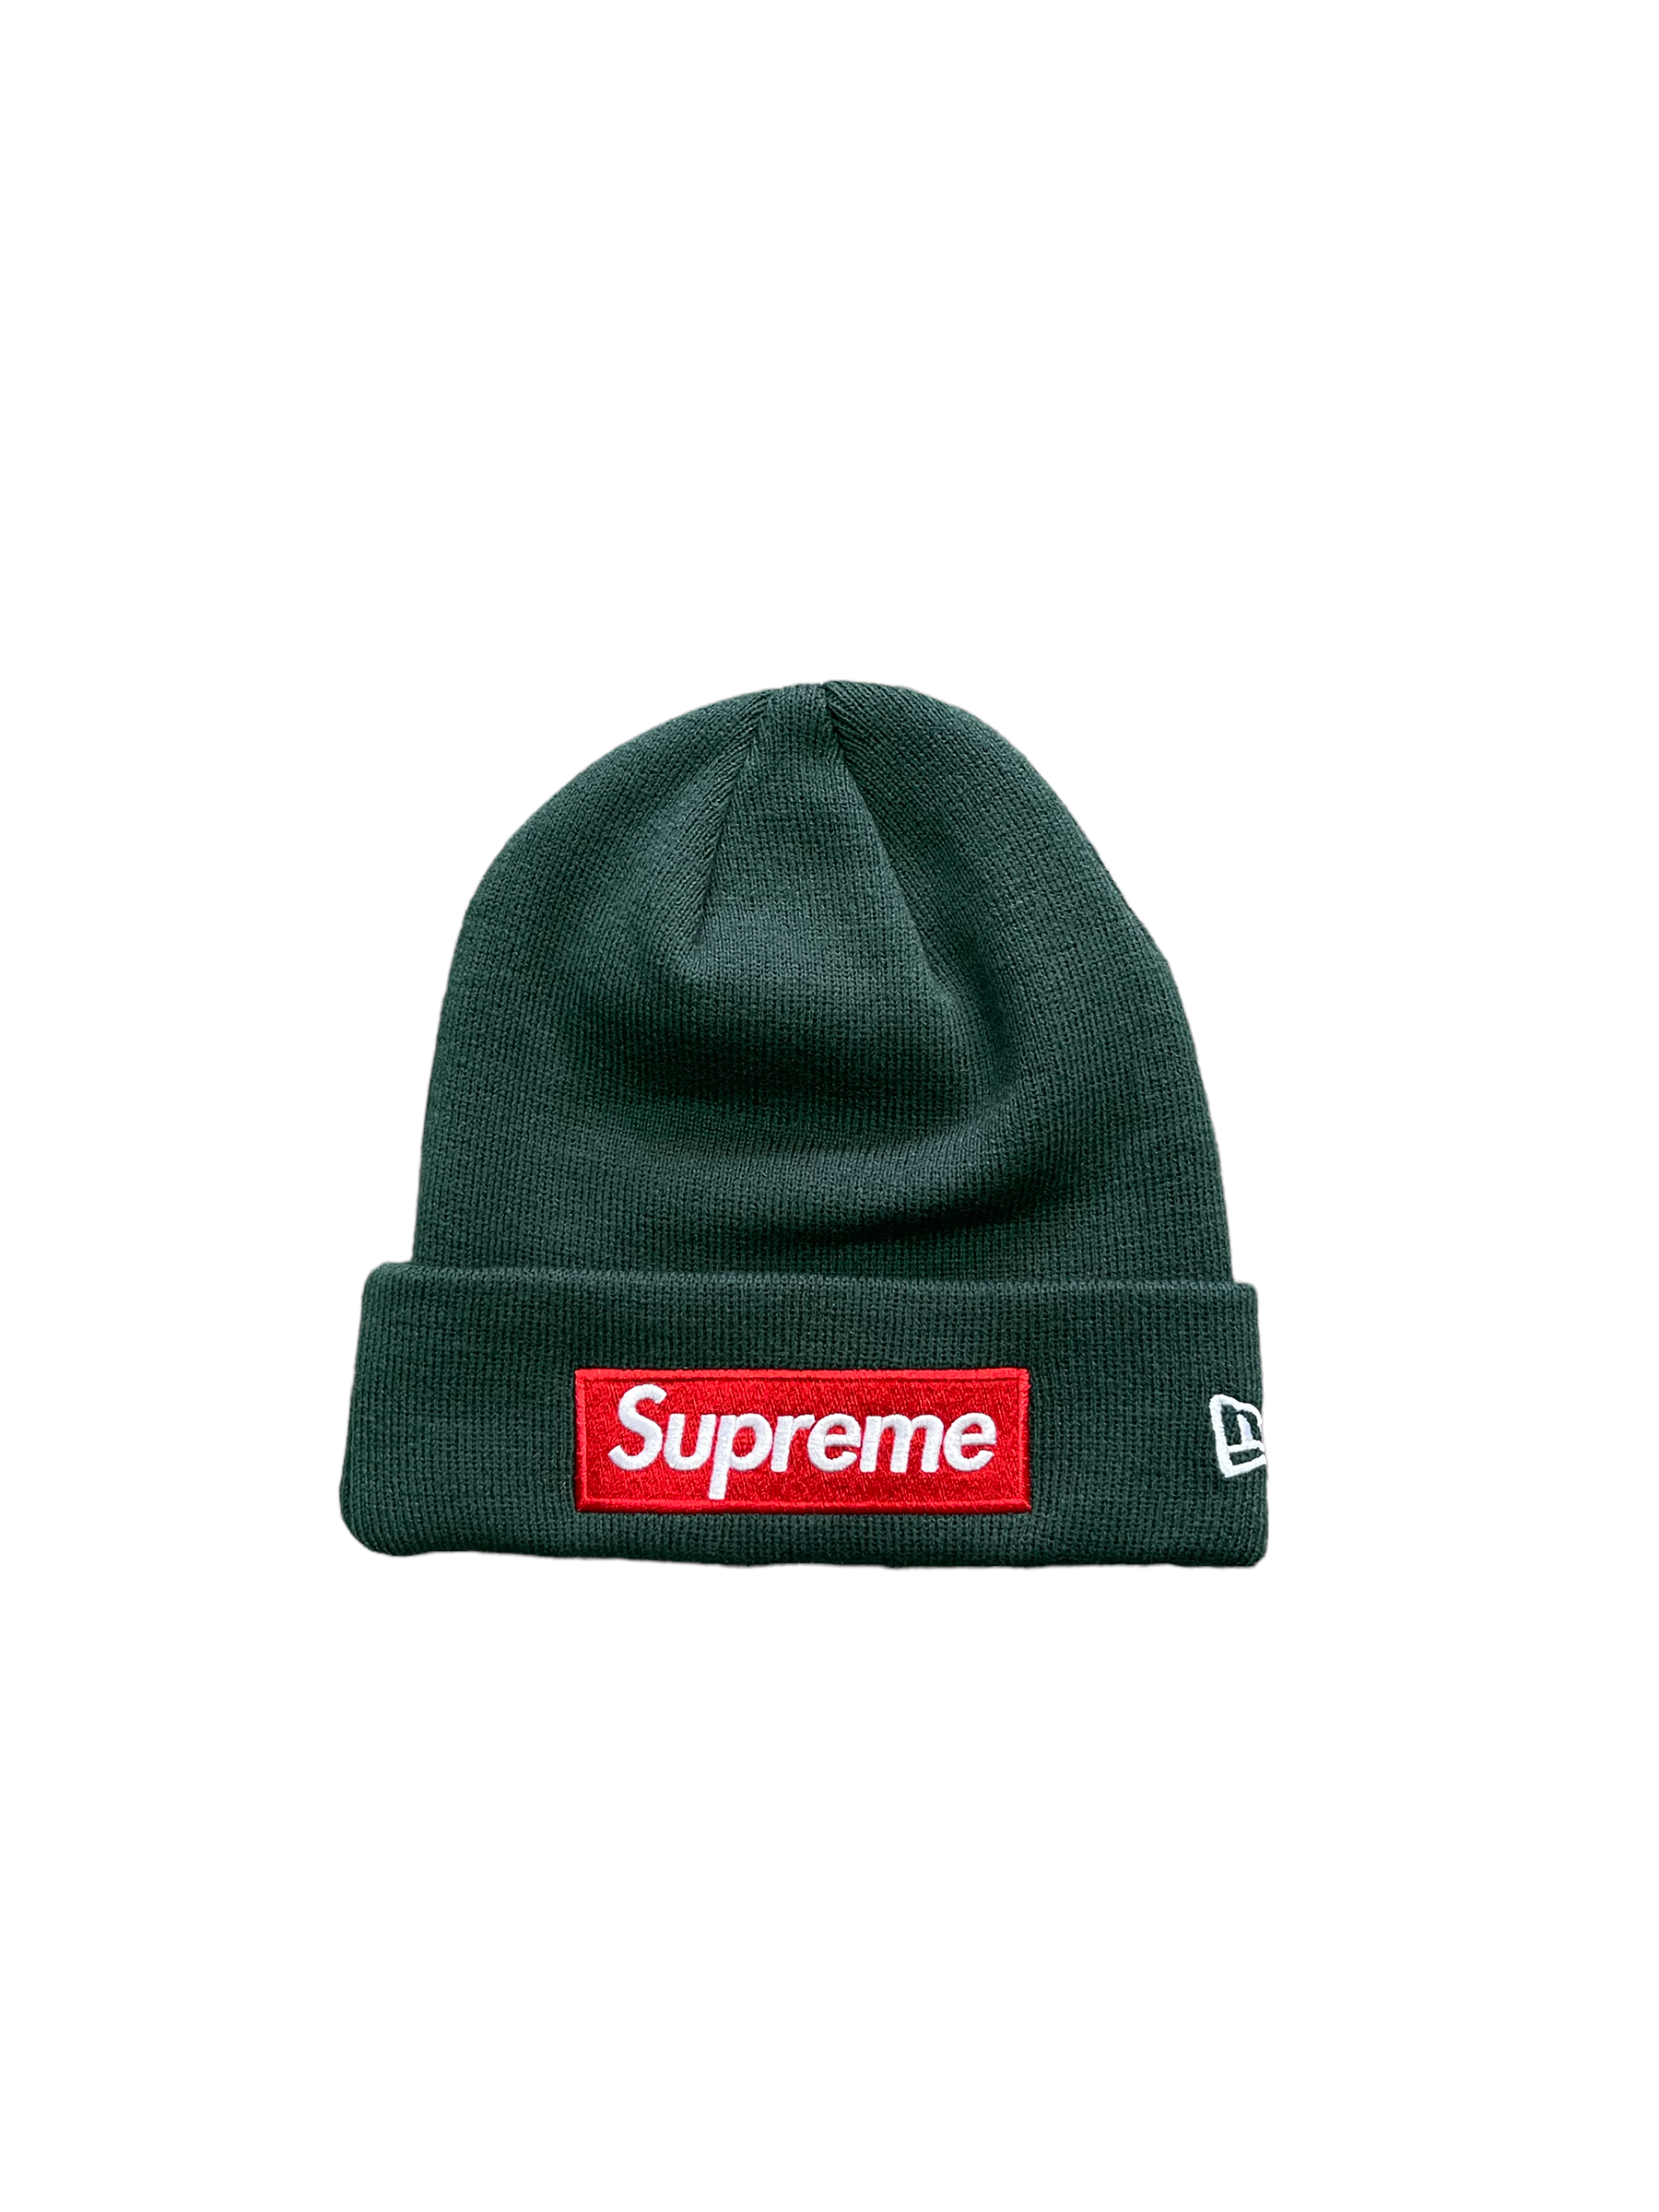 FW22 Supreme Box Logo Beanie – fitted.cny